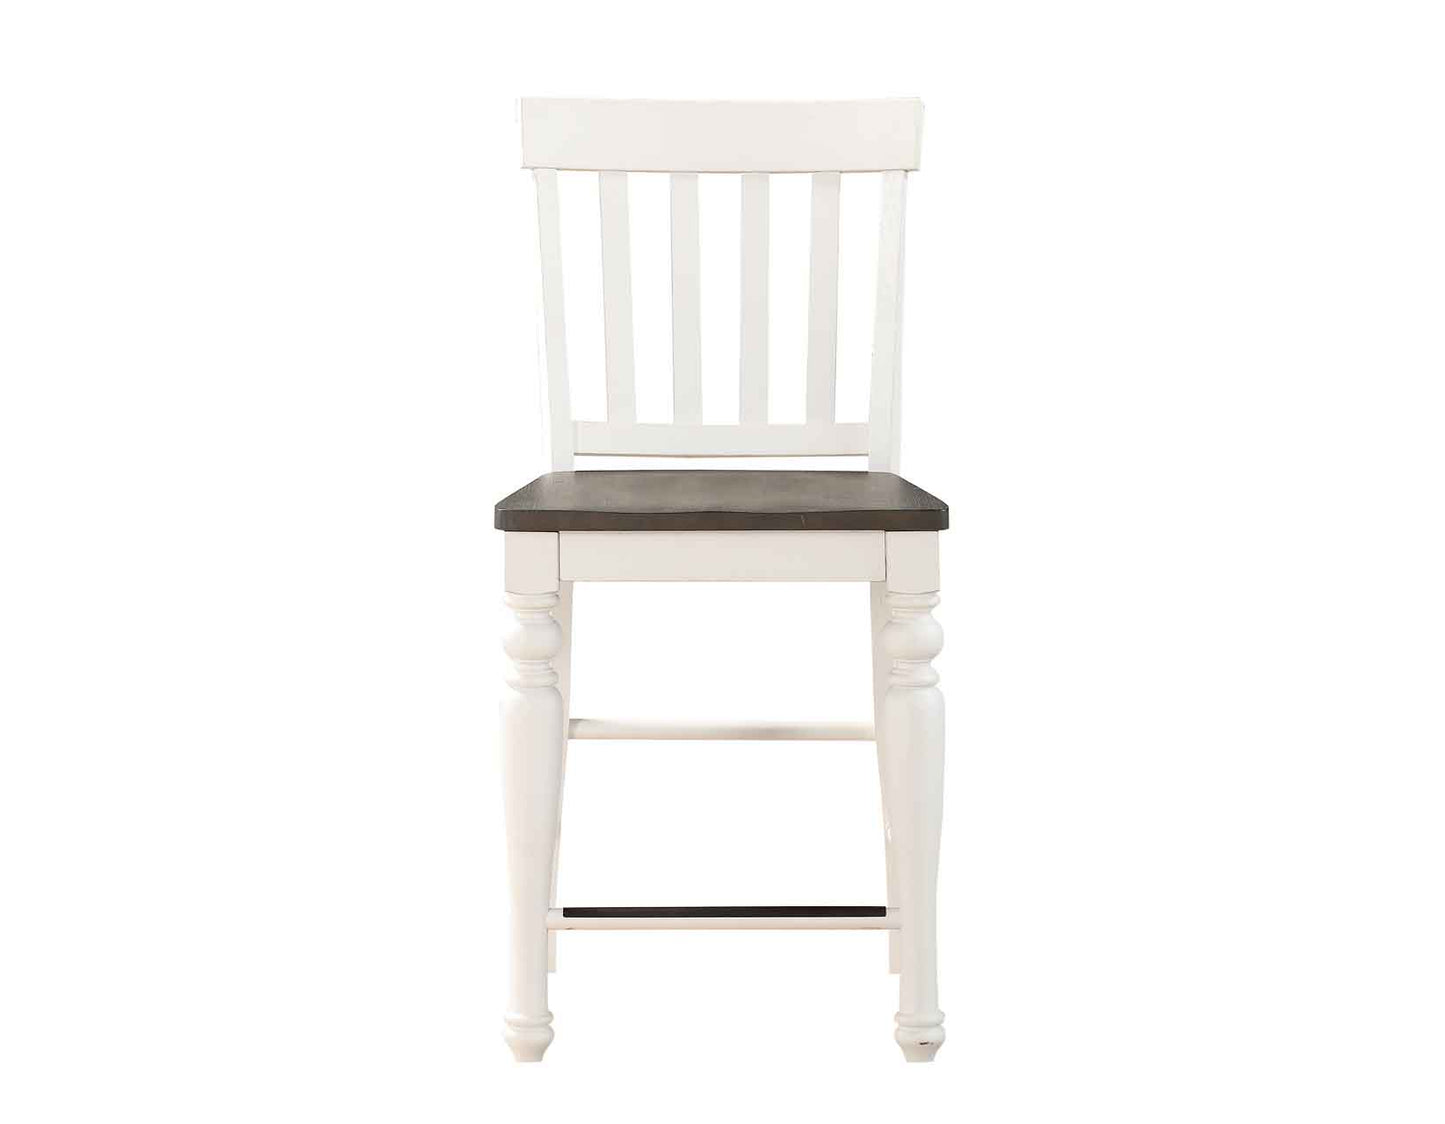 Joanna Two-Tone Counter Height Chairs (includes 2 chairs) by Steve Silver